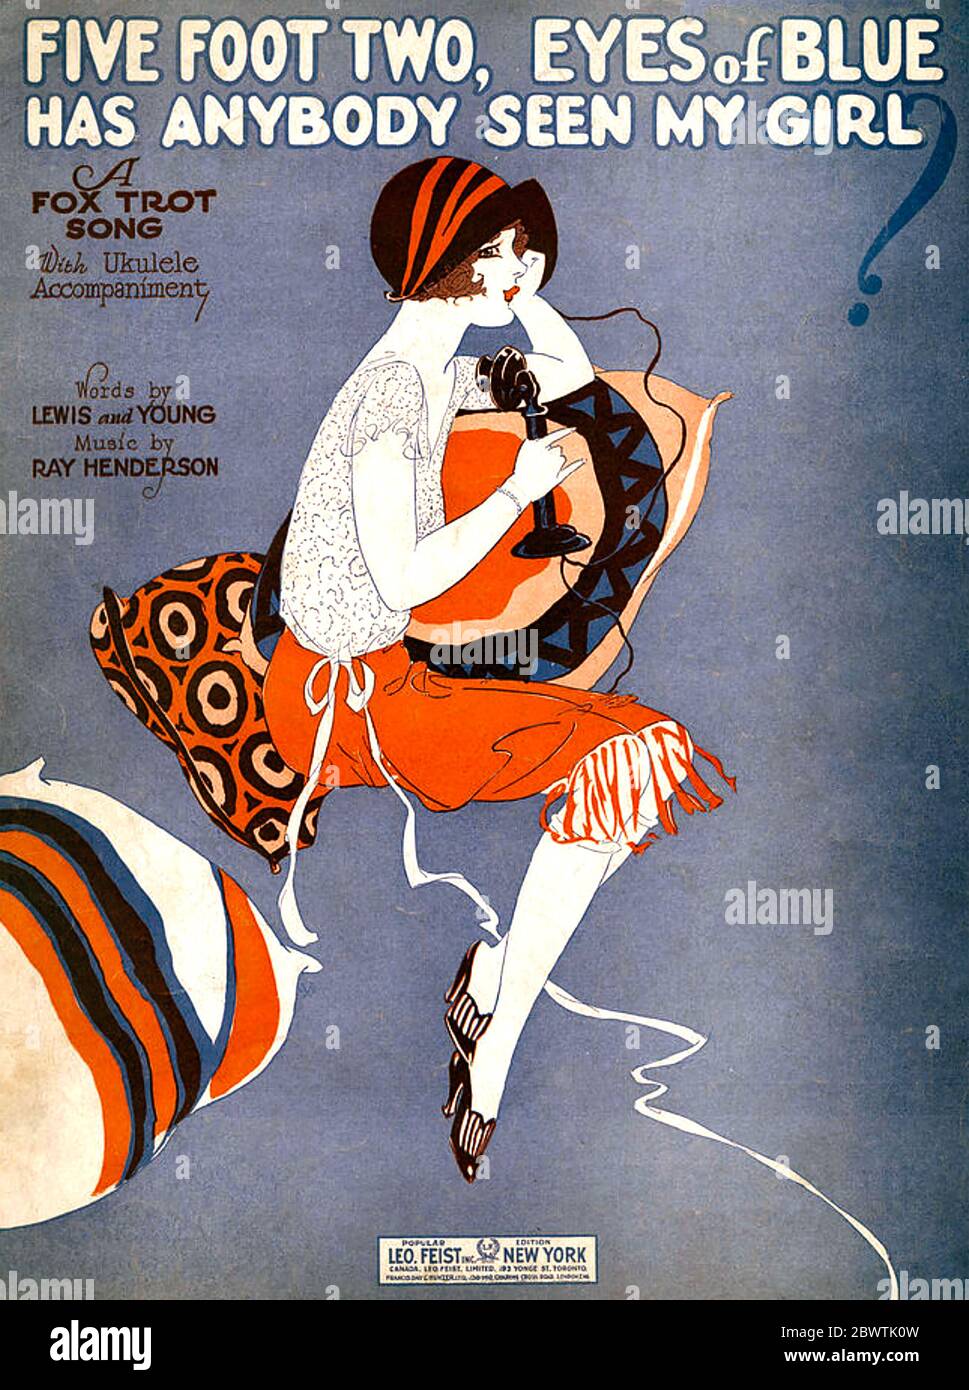 FIVE FOOT TWO, EYES OF BLUE...sheet music cover for the 1925 song published by Leo Fesit Inc Stock Photo